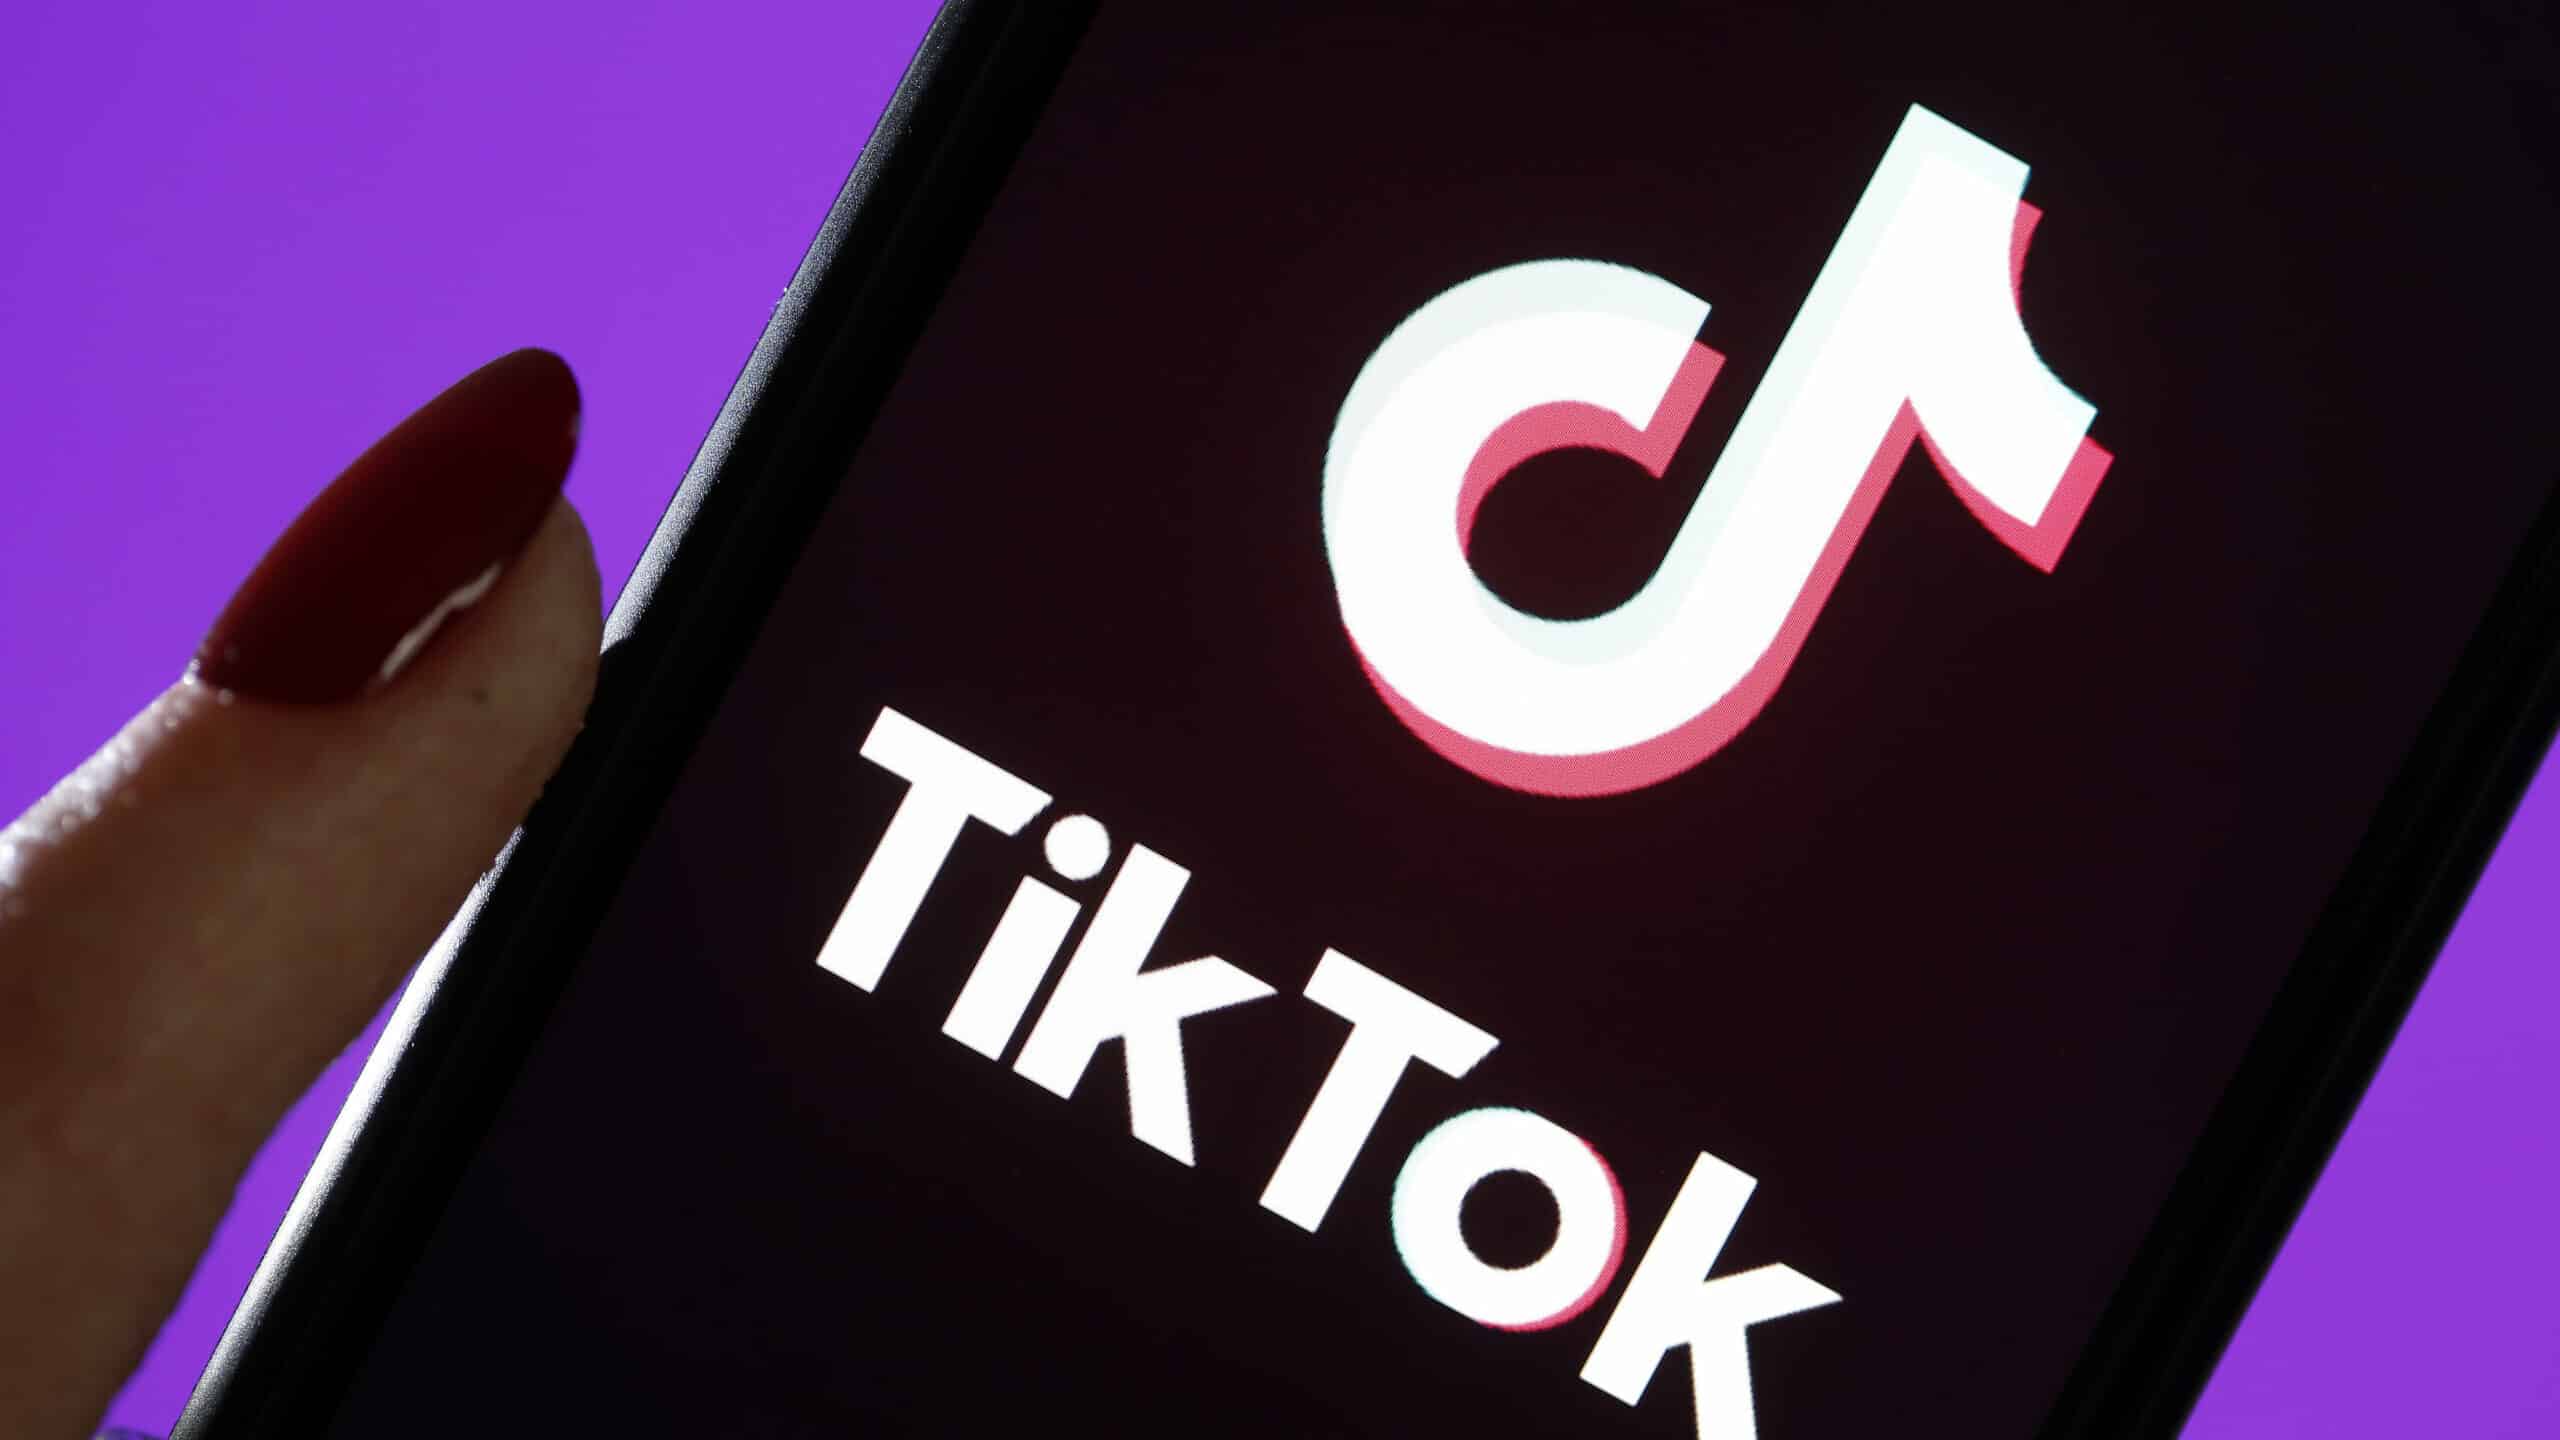 In this photo illustration, the social media application logo, TikTok is displayed on the screen of an iPhone on March 05, 2019 in Paris, France. The social network broke the rules for the protection of children's online privacy (COPPA) and was fined $ 5.7 million. The fact TikTok criticized is quite serious in the United States, the platform, which currently has more than 500 million users worldwide, collected data that should not have asked minors. TikTok, also known as Douyin in China, is a media app for creating and sharing short videos. Owned by ByteDance, Tik Tok is a leading video platform in Asia, United States, and other parts of the world. In 2018, the application gained popularity and became the most downloaded app in the U.S. in October 2018.